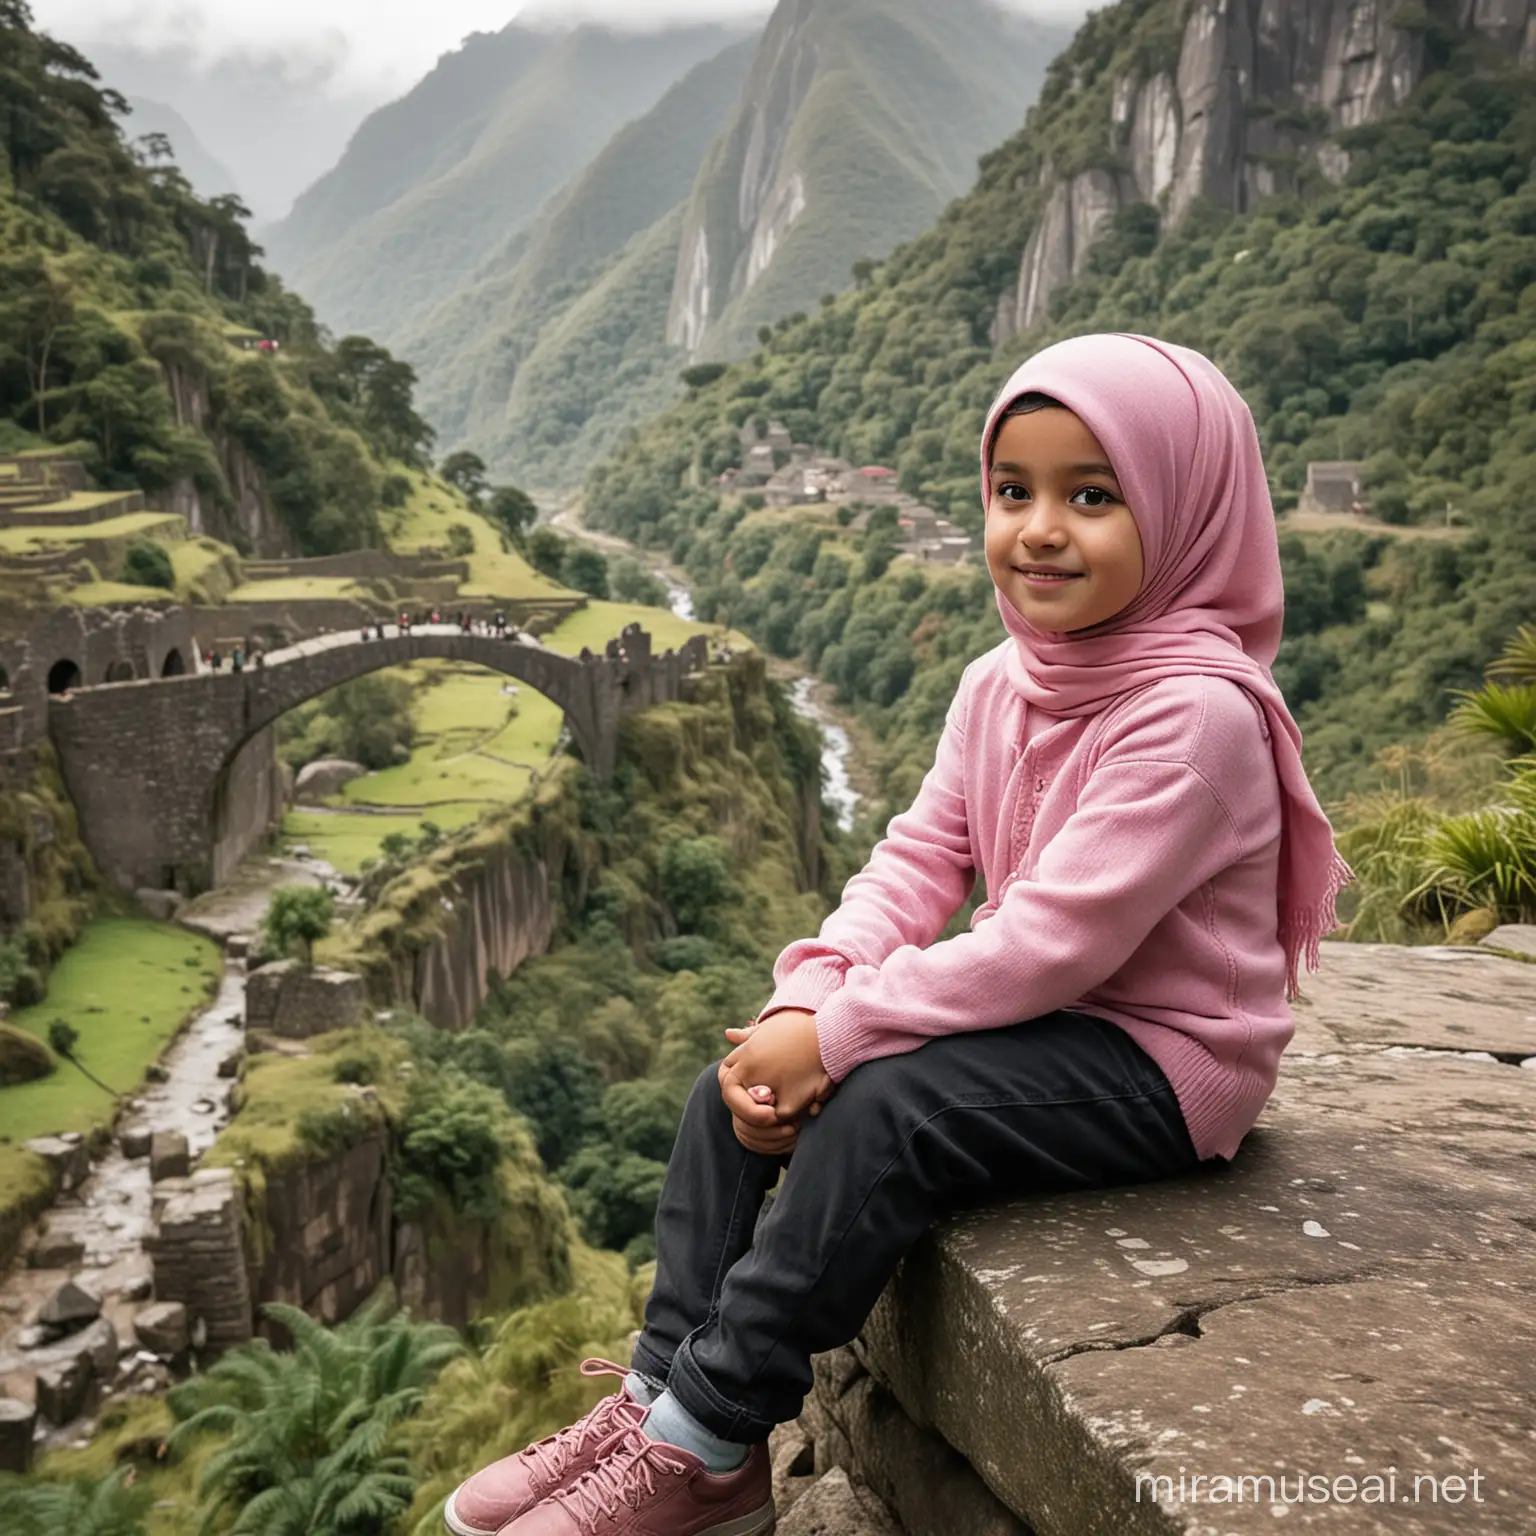 Adorable Girl in Hijab Sitting on Rock by Ancient Stone Bridge in Rainforest